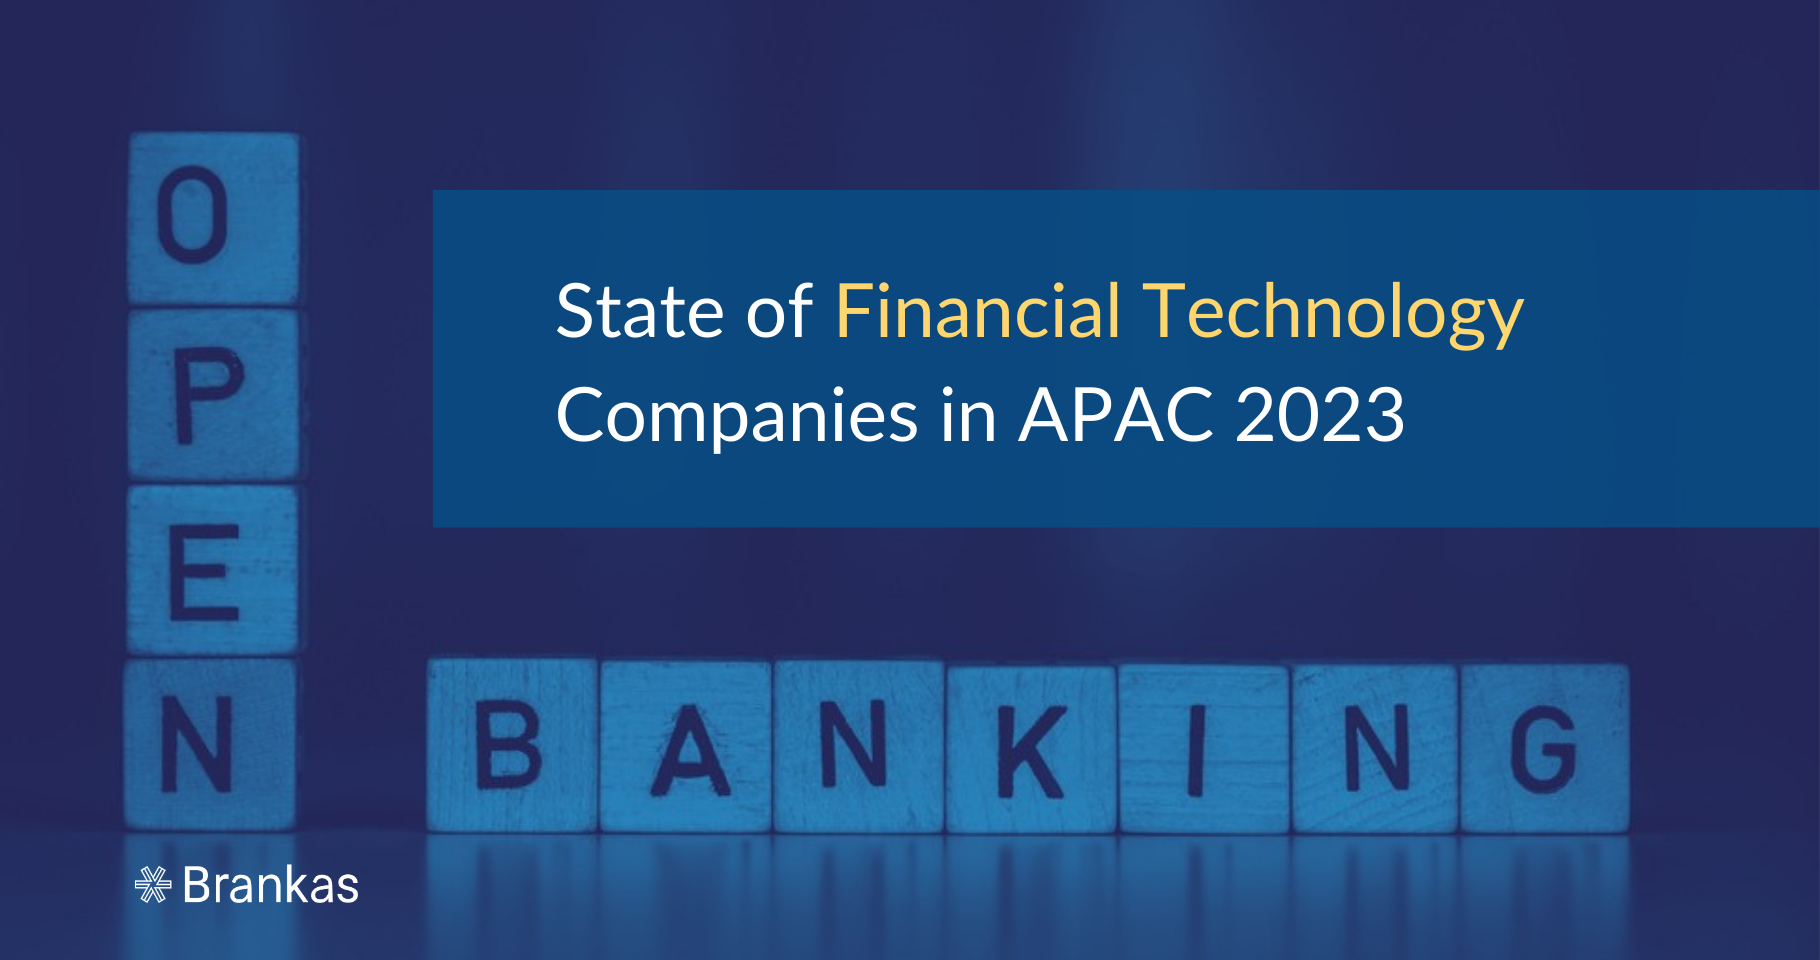 State of Financial Technology Companies in Asia Pacific 2023